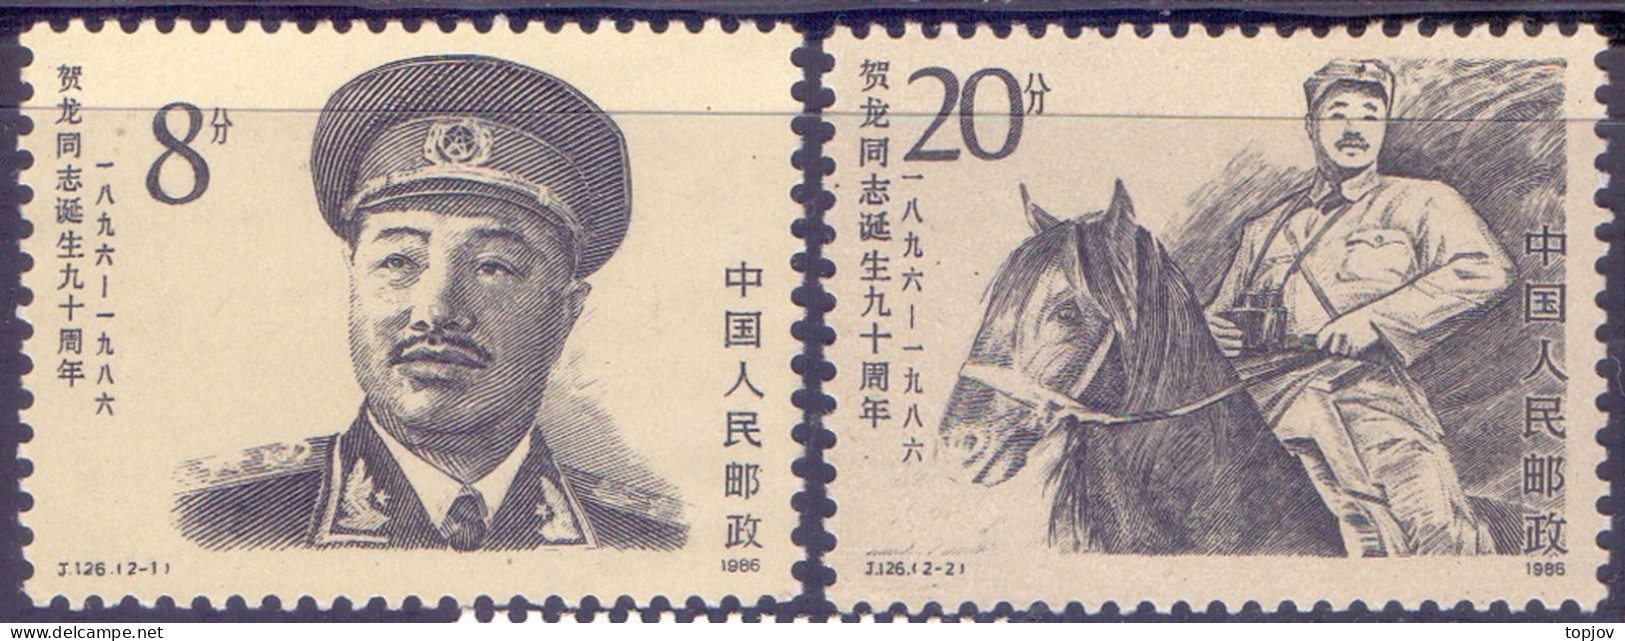 CHINA -  HE LONG - HORSE J.126 - **MNH - 1986 - Cranes And Other Gruiformes